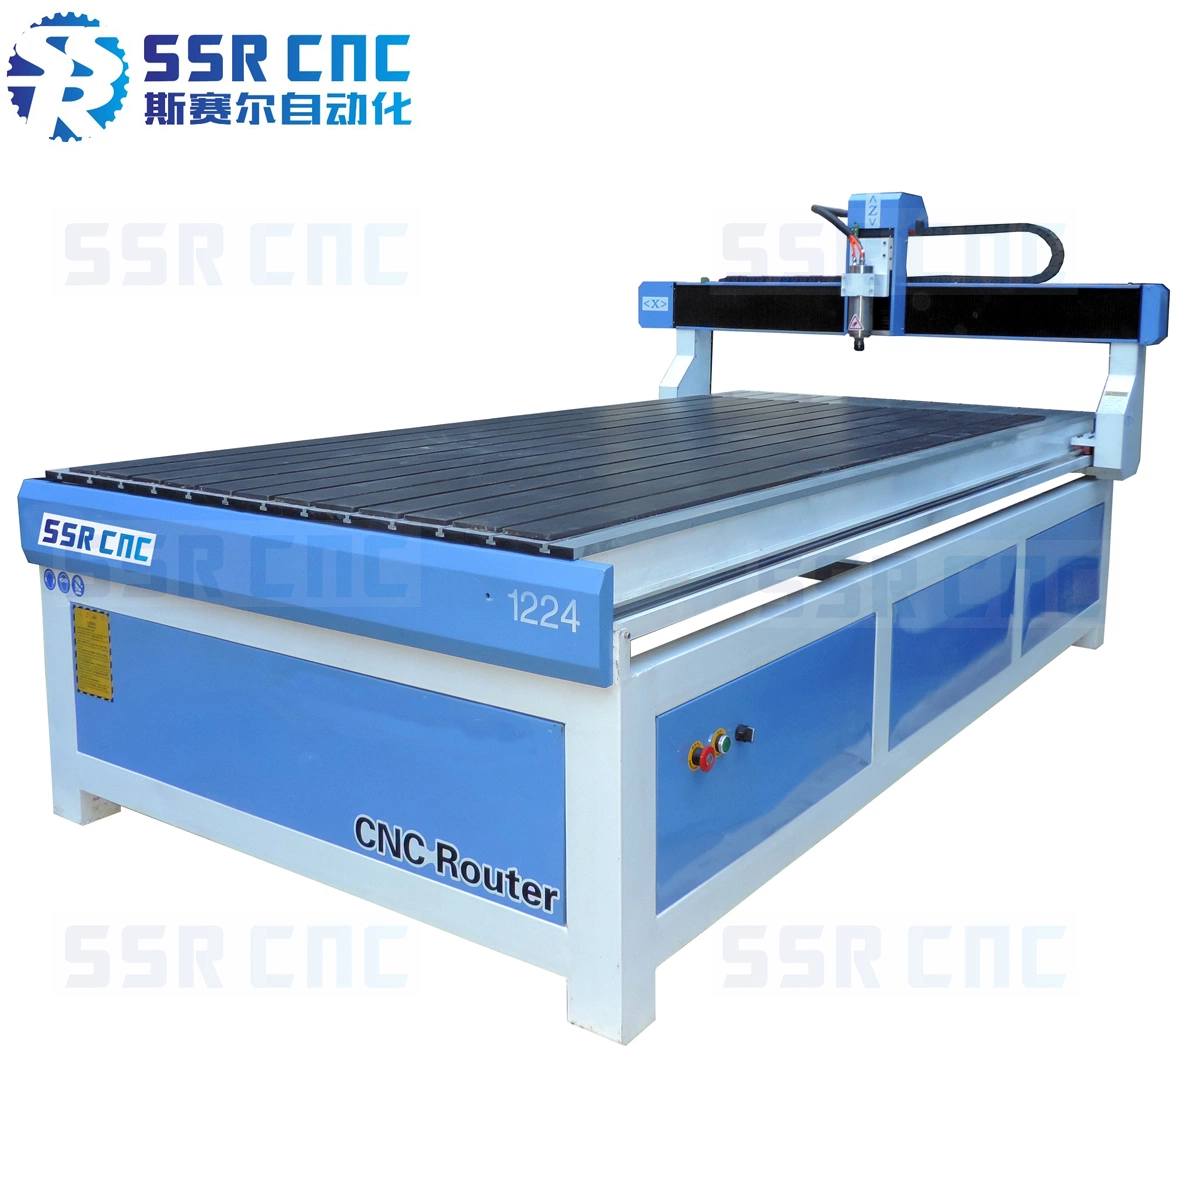 Machinery CNC Wood Router Engraving Woodworking Machinery